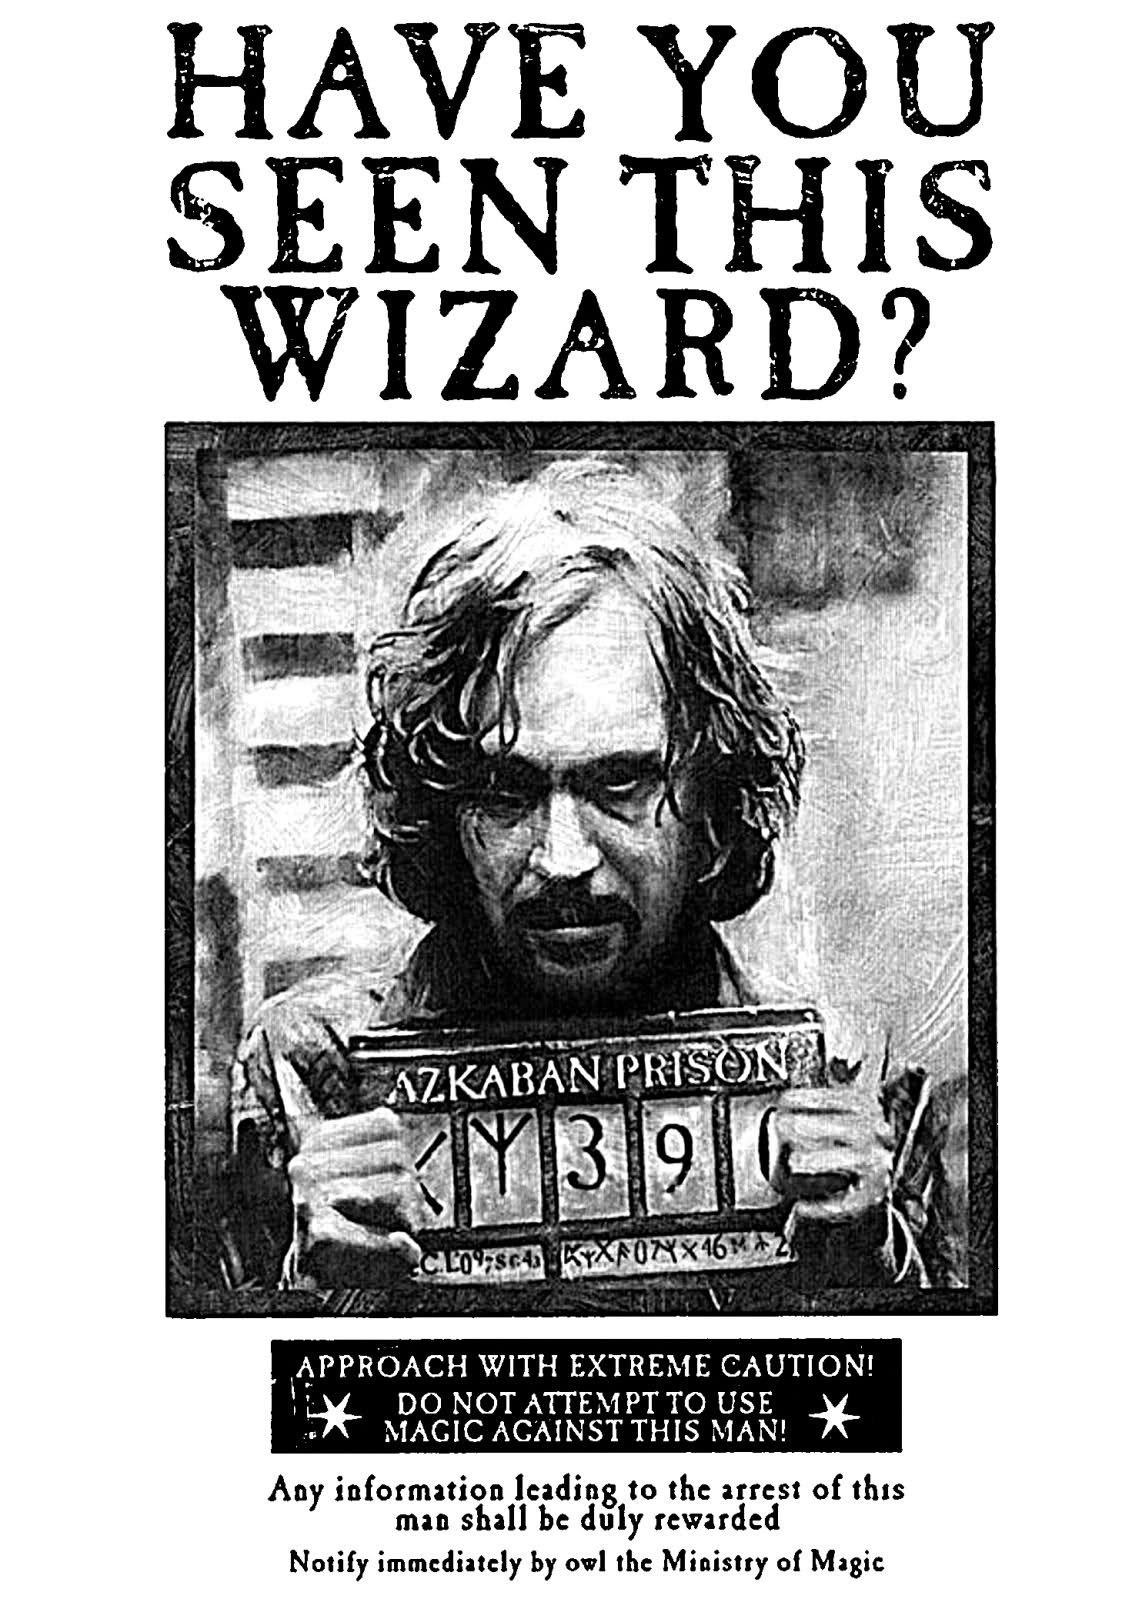 Looking For Harry Potter Sirius Black Wanted Poster Harry Potter Sirius Harry Potter Poster Harry Potter Wanted Poster